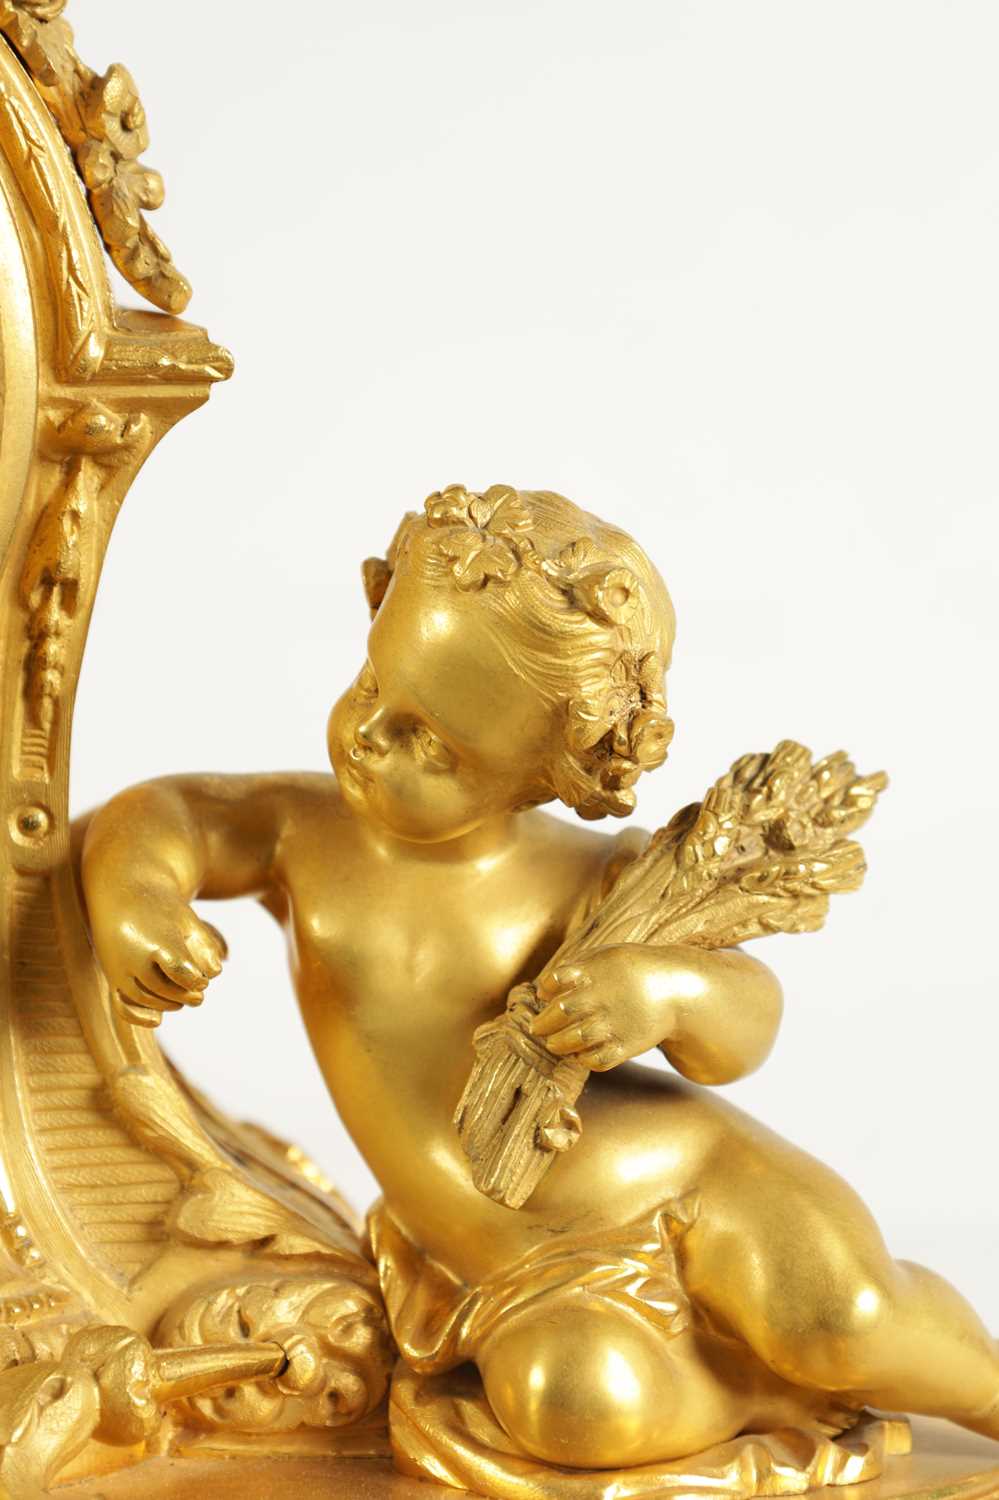 A LATE 19TH CENTURY FRENCH ORMOLU AND PORCELAIN PANELLED FIGURAL MANTEL CLOCK - Image 4 of 12